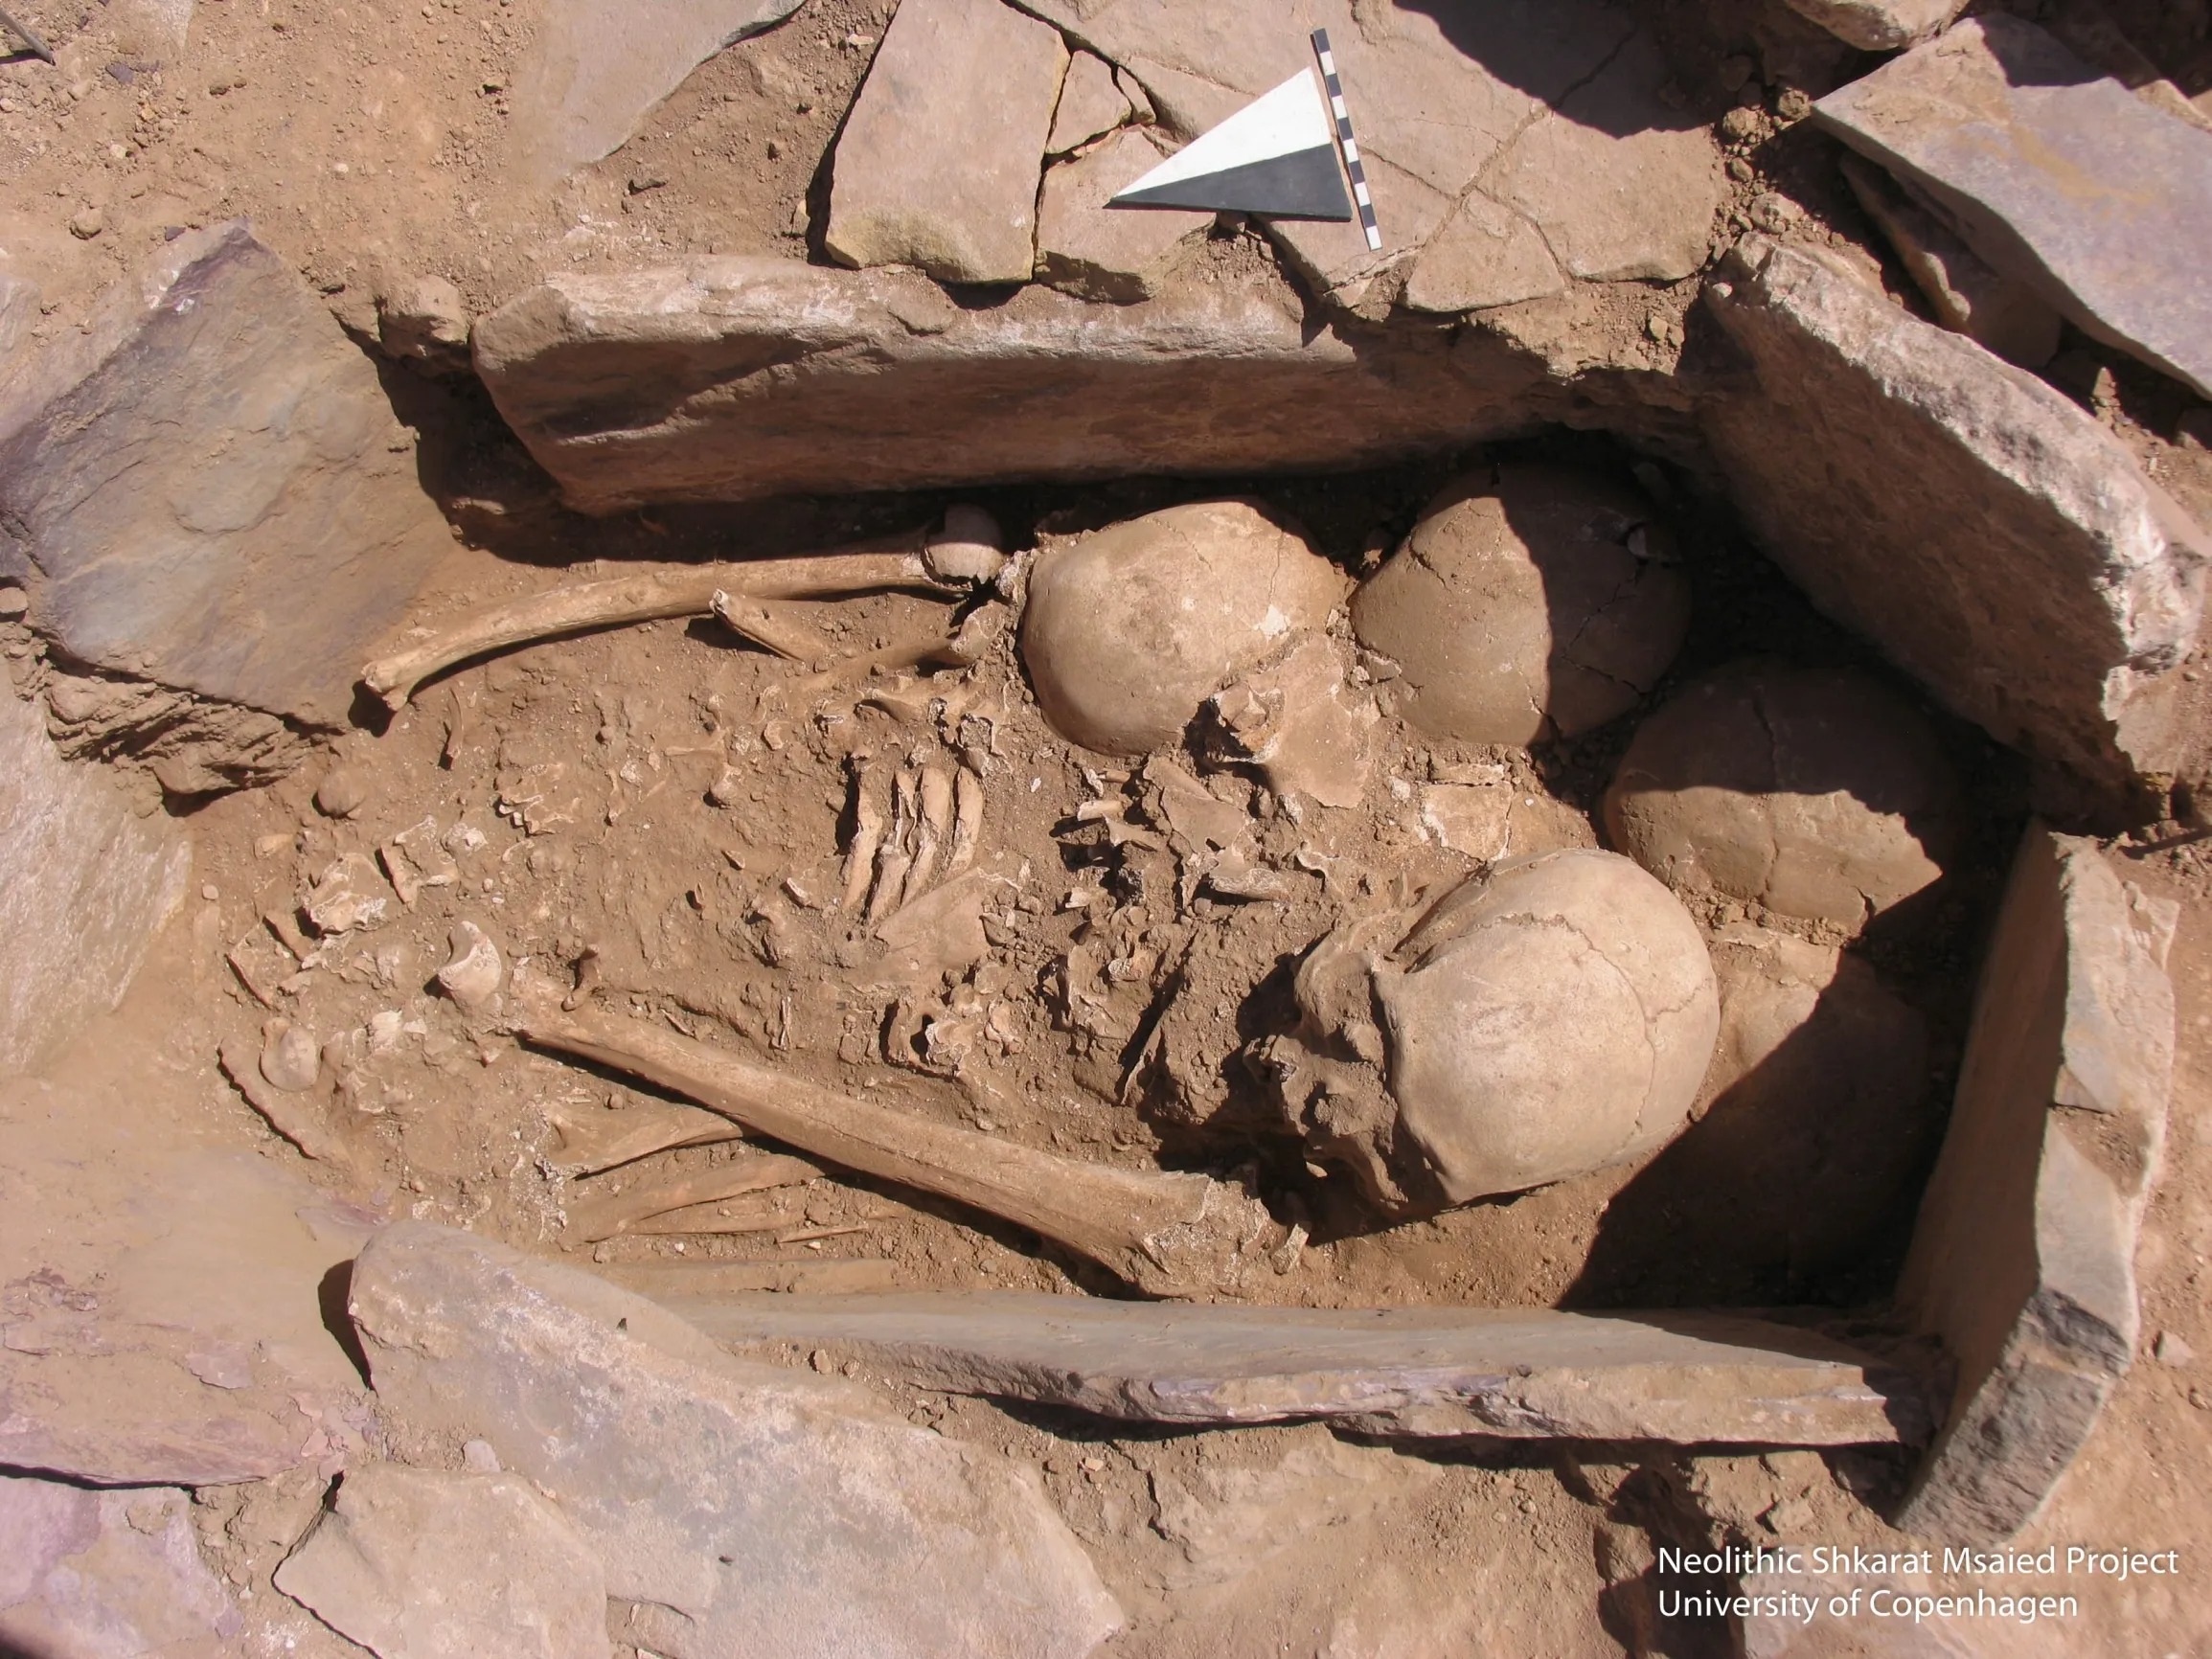 9,000-Year-Old Skeletons Found In Jordan Had Been ᴅɪsᴍᴇᴍʙᴇʀᴇᴅ, Sorted, And Buried In Homes